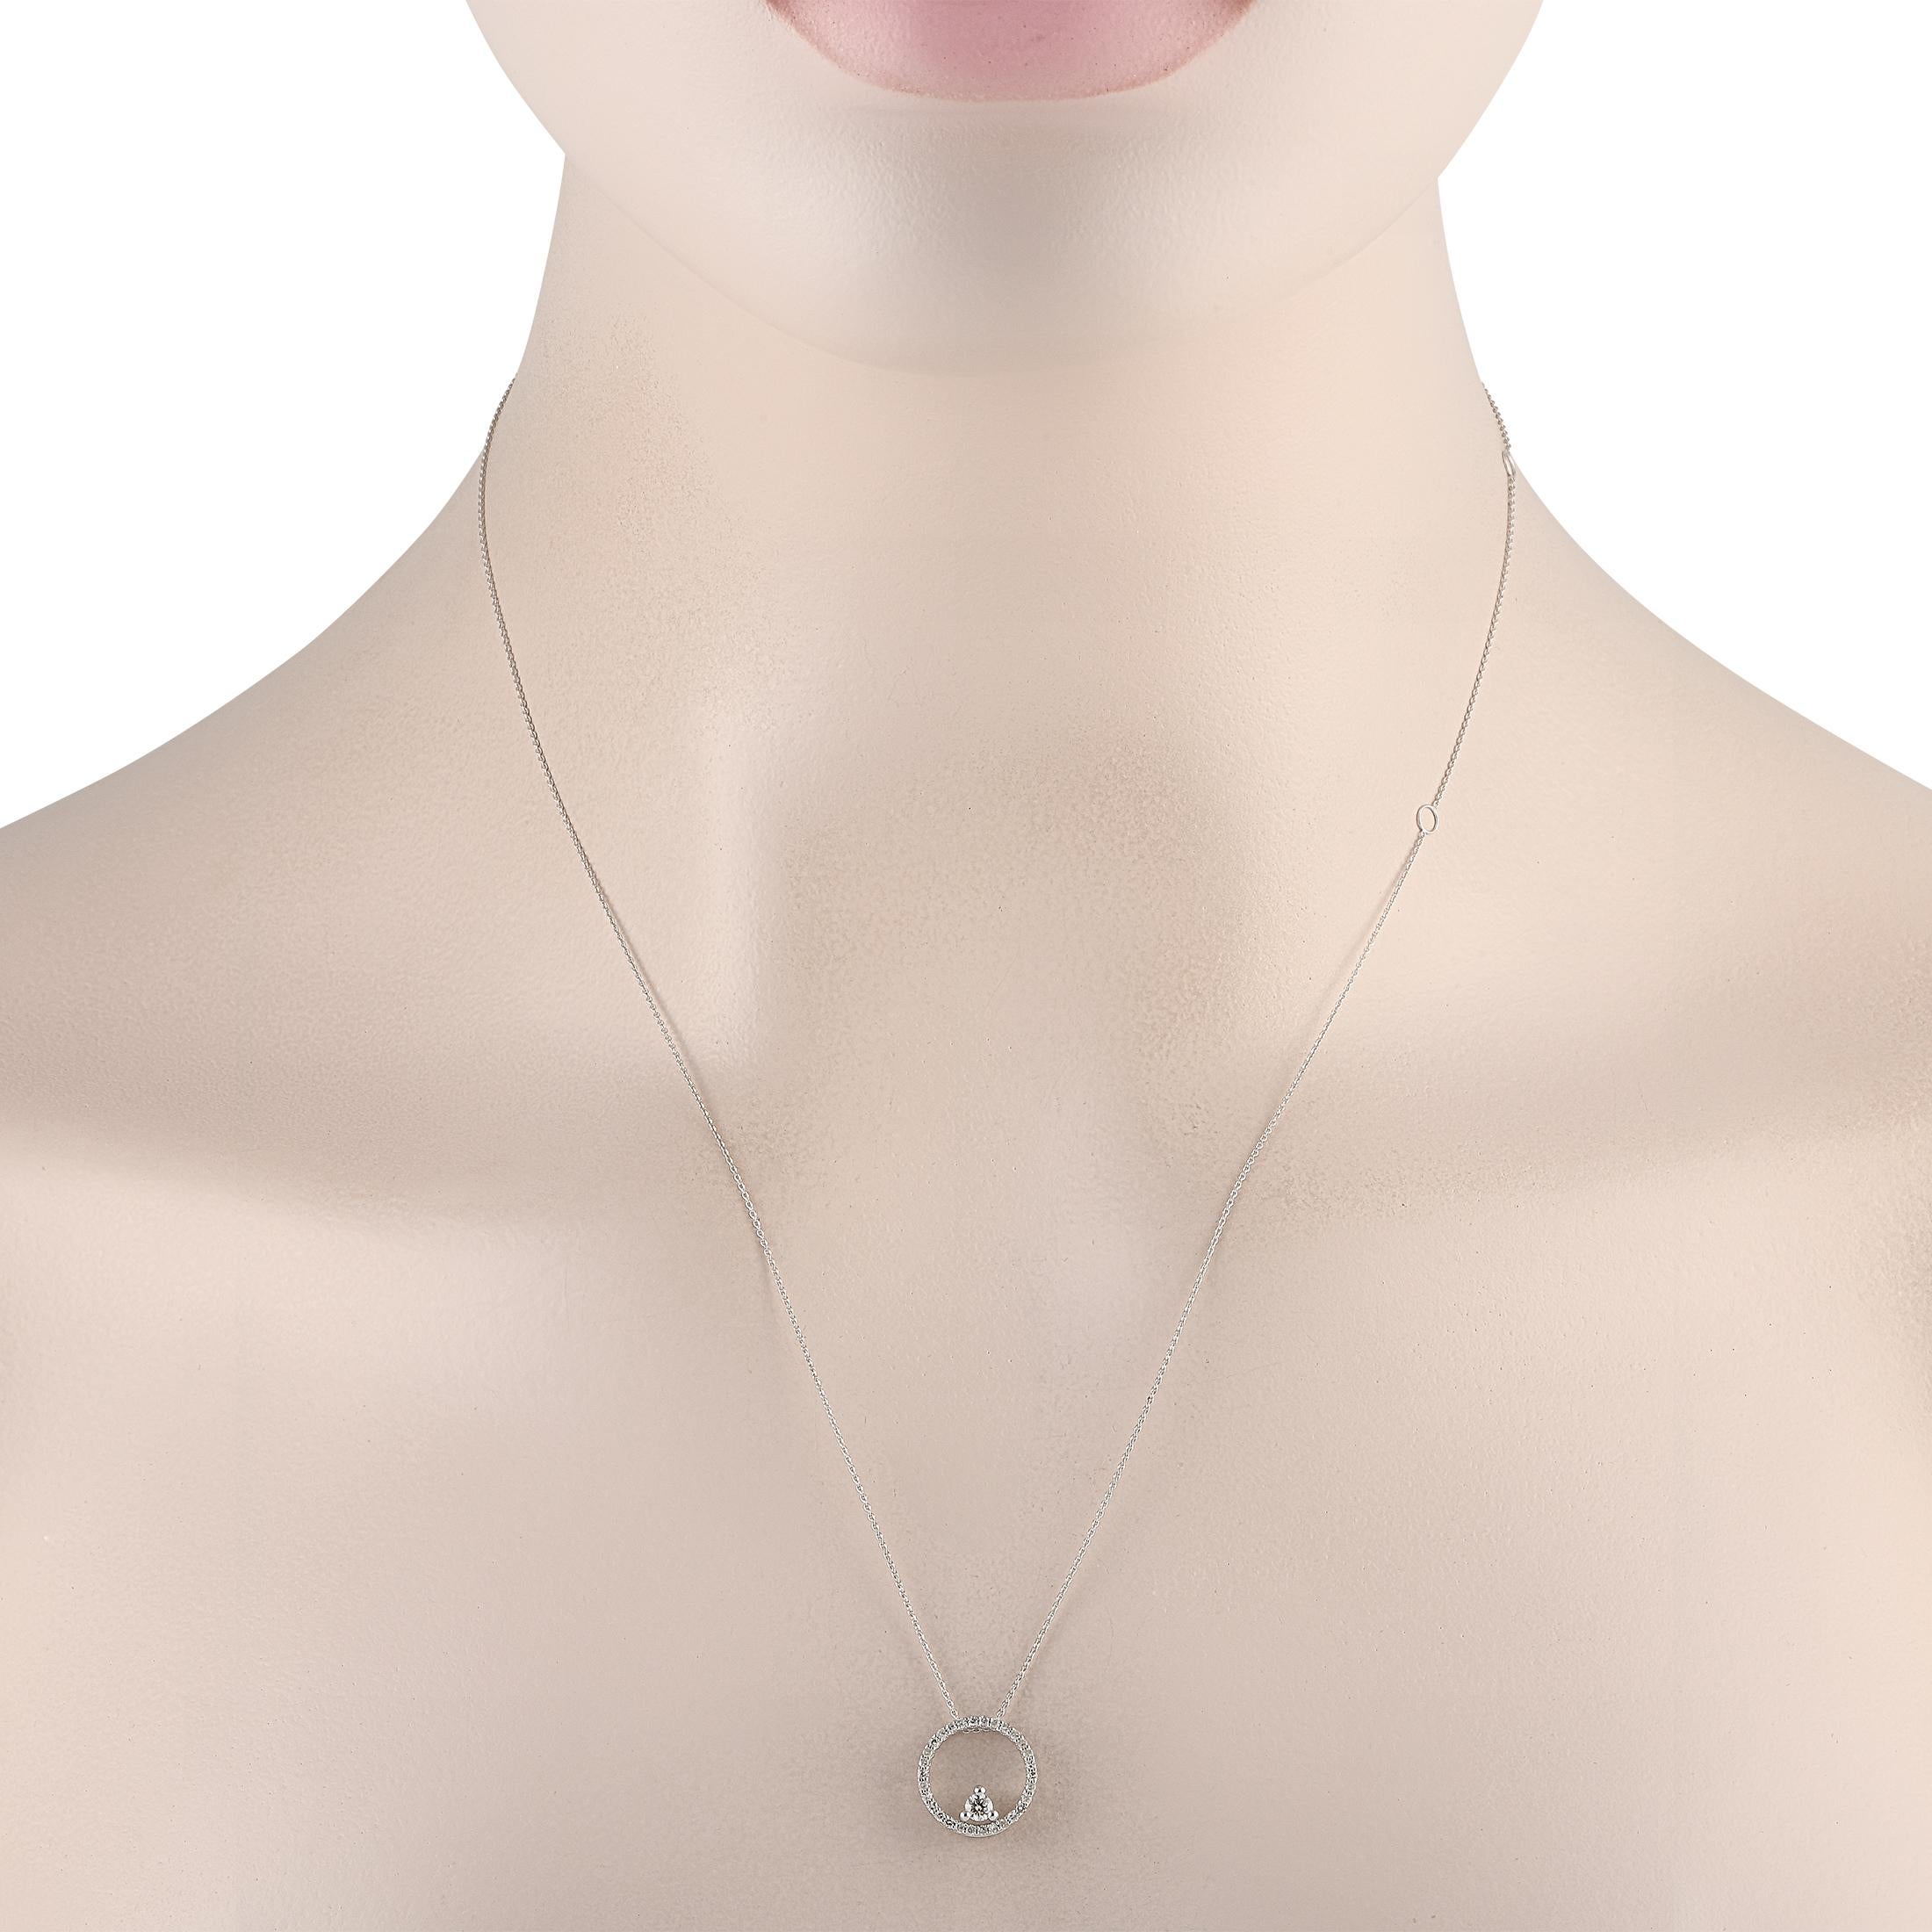 Geometric forms and luxurious materials make this necklace a timeless piece that will never go out of style. The circular pendant measures 0.5 round and comes to life thanks to dazzling Diamonds with a total weight of 0.25 carats. Crafted from 14K